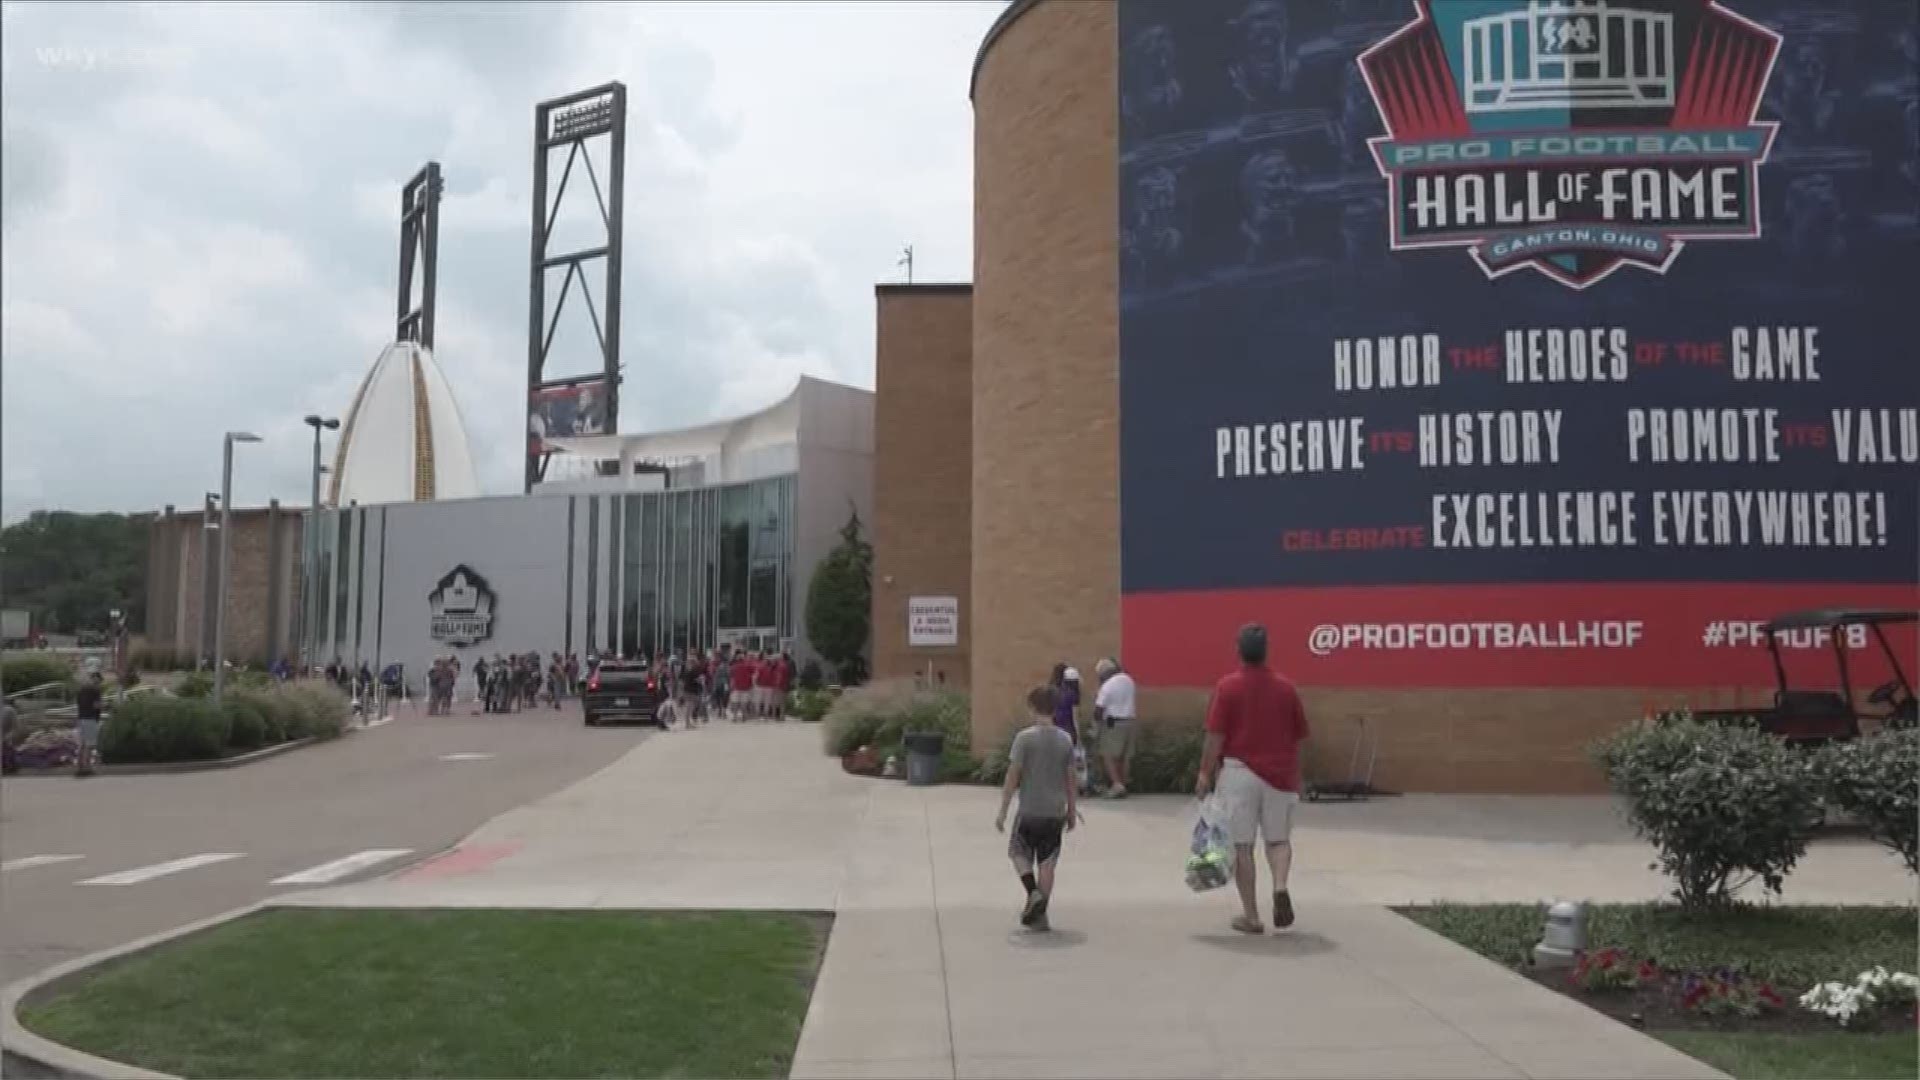 The Pro Football Hall of Fame is hosting enshrinement week -- with festivities all weekend, including the parade, ceremony and Hall of Fame Game